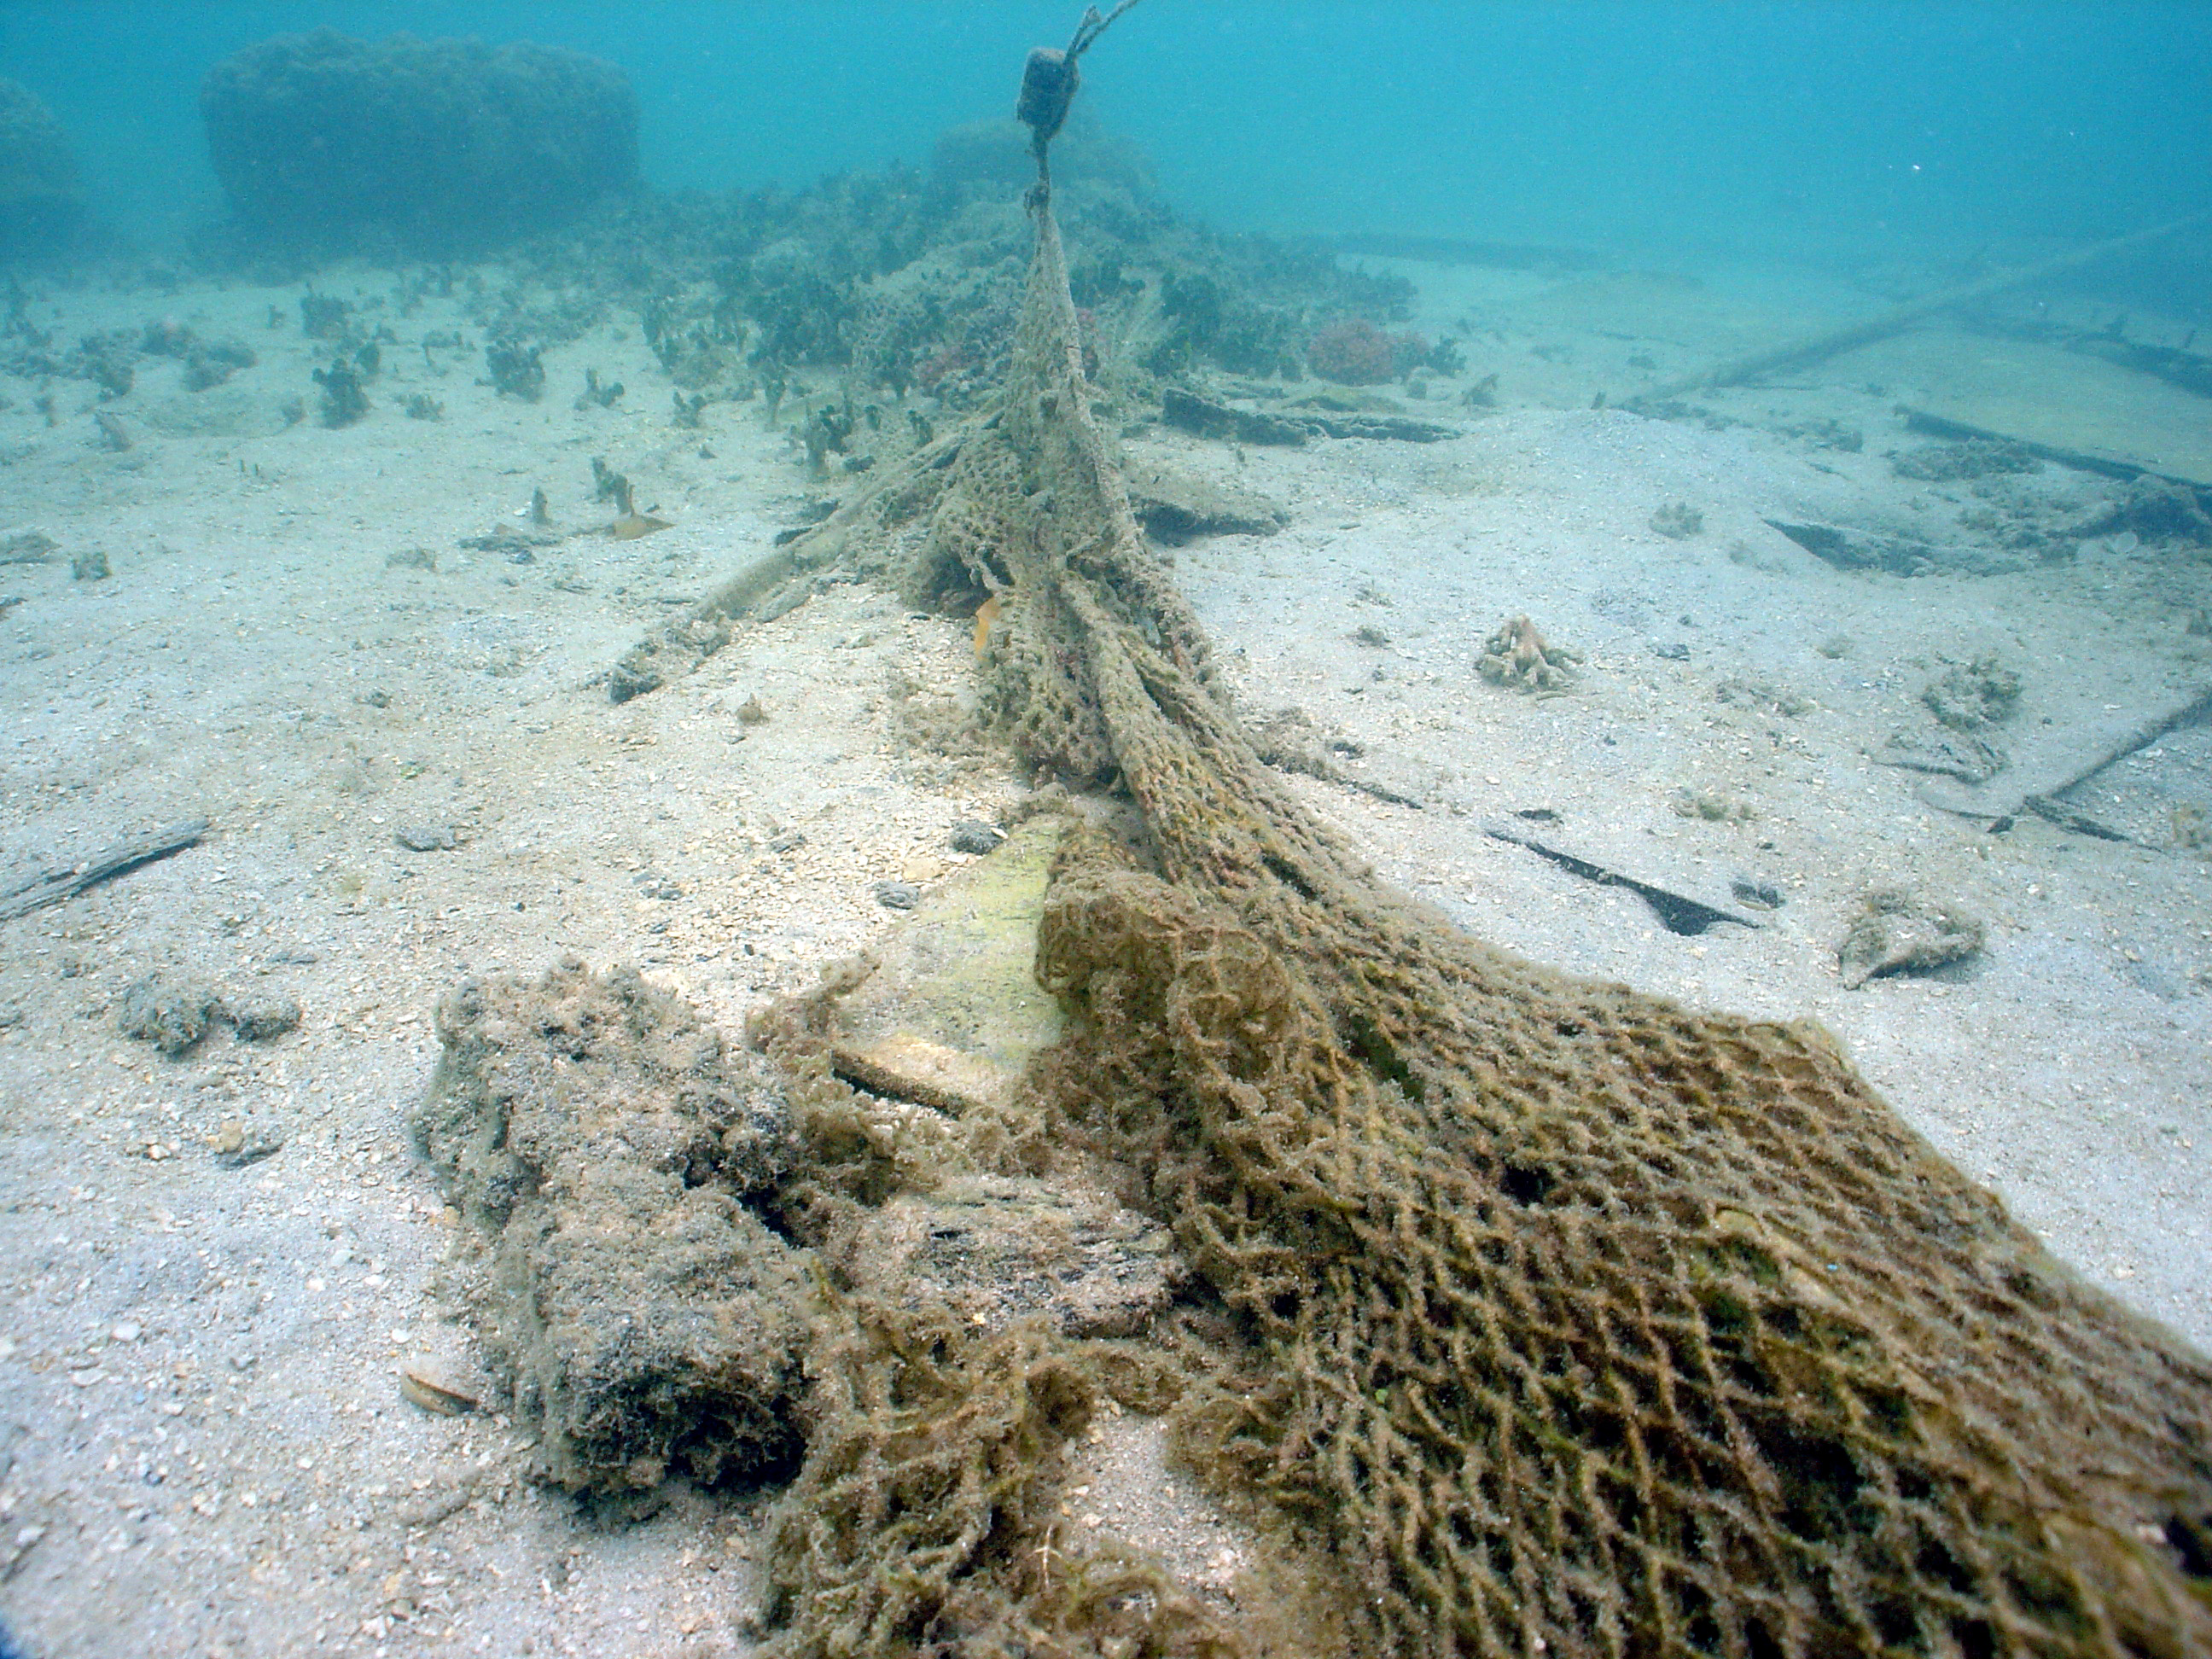 Fishing nets snagged debris from a sunken vessel: Saipan, Commonwealth of the Northern Mariana Islands.